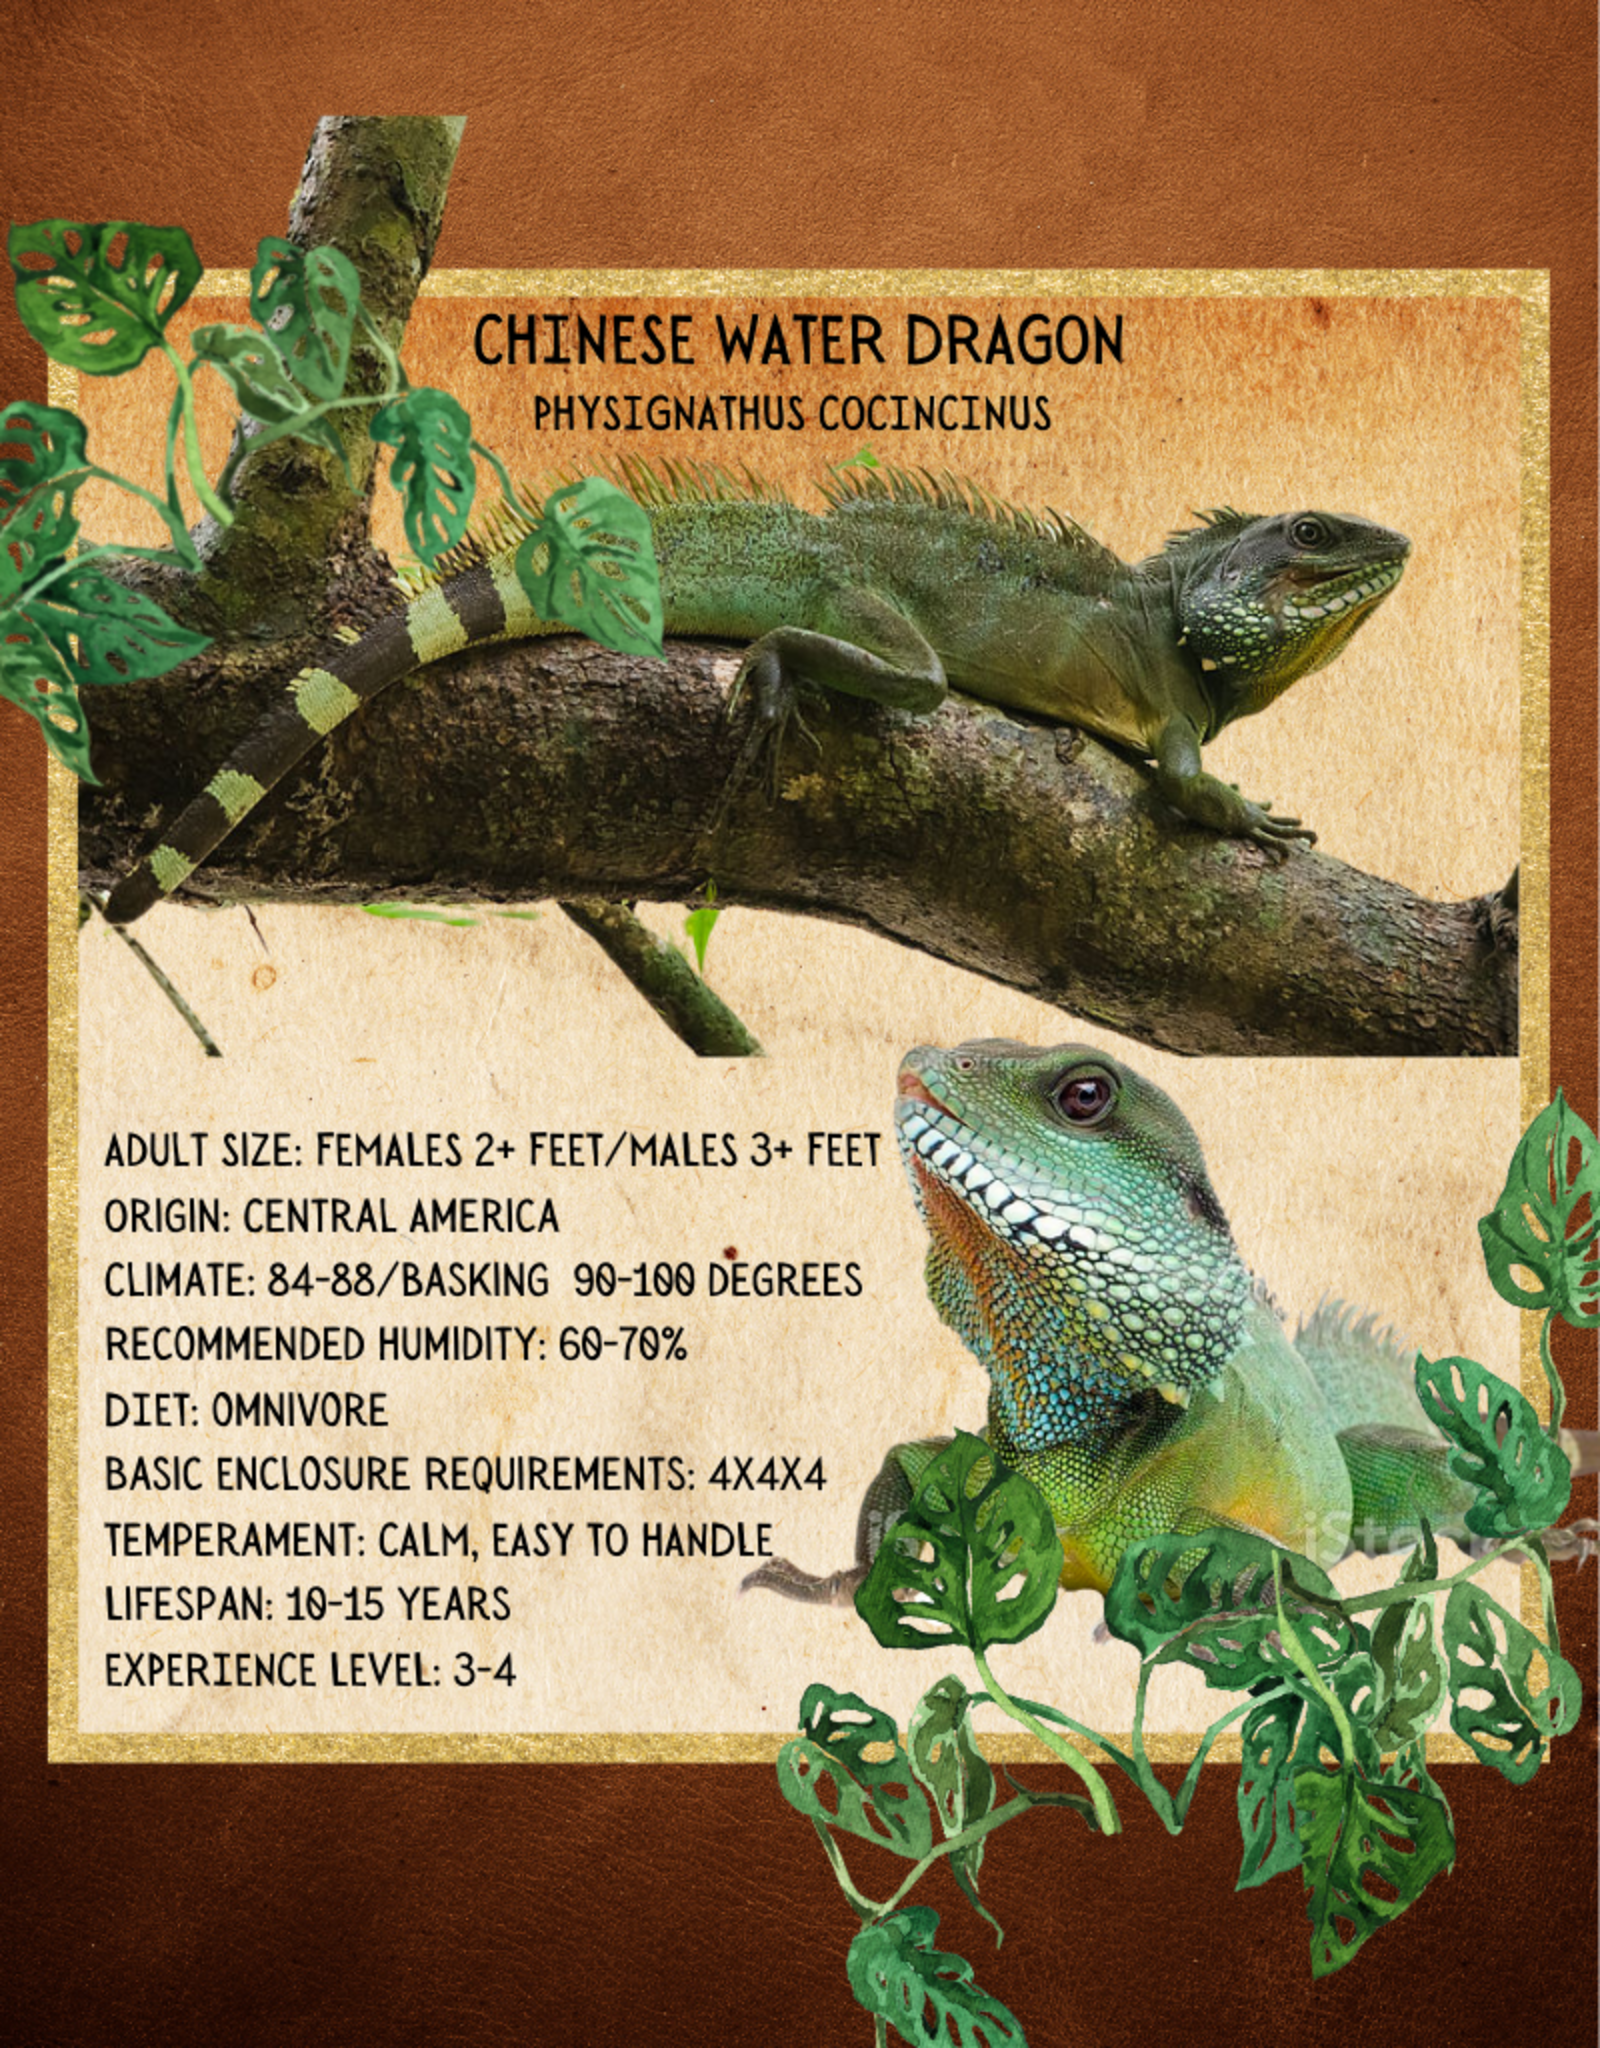 LIZARD CHINESE WATER DRAGON #1- PHYSIGNATHUS COCINCINUS- 4 INCHES- CB IN STORE- 6-07-24